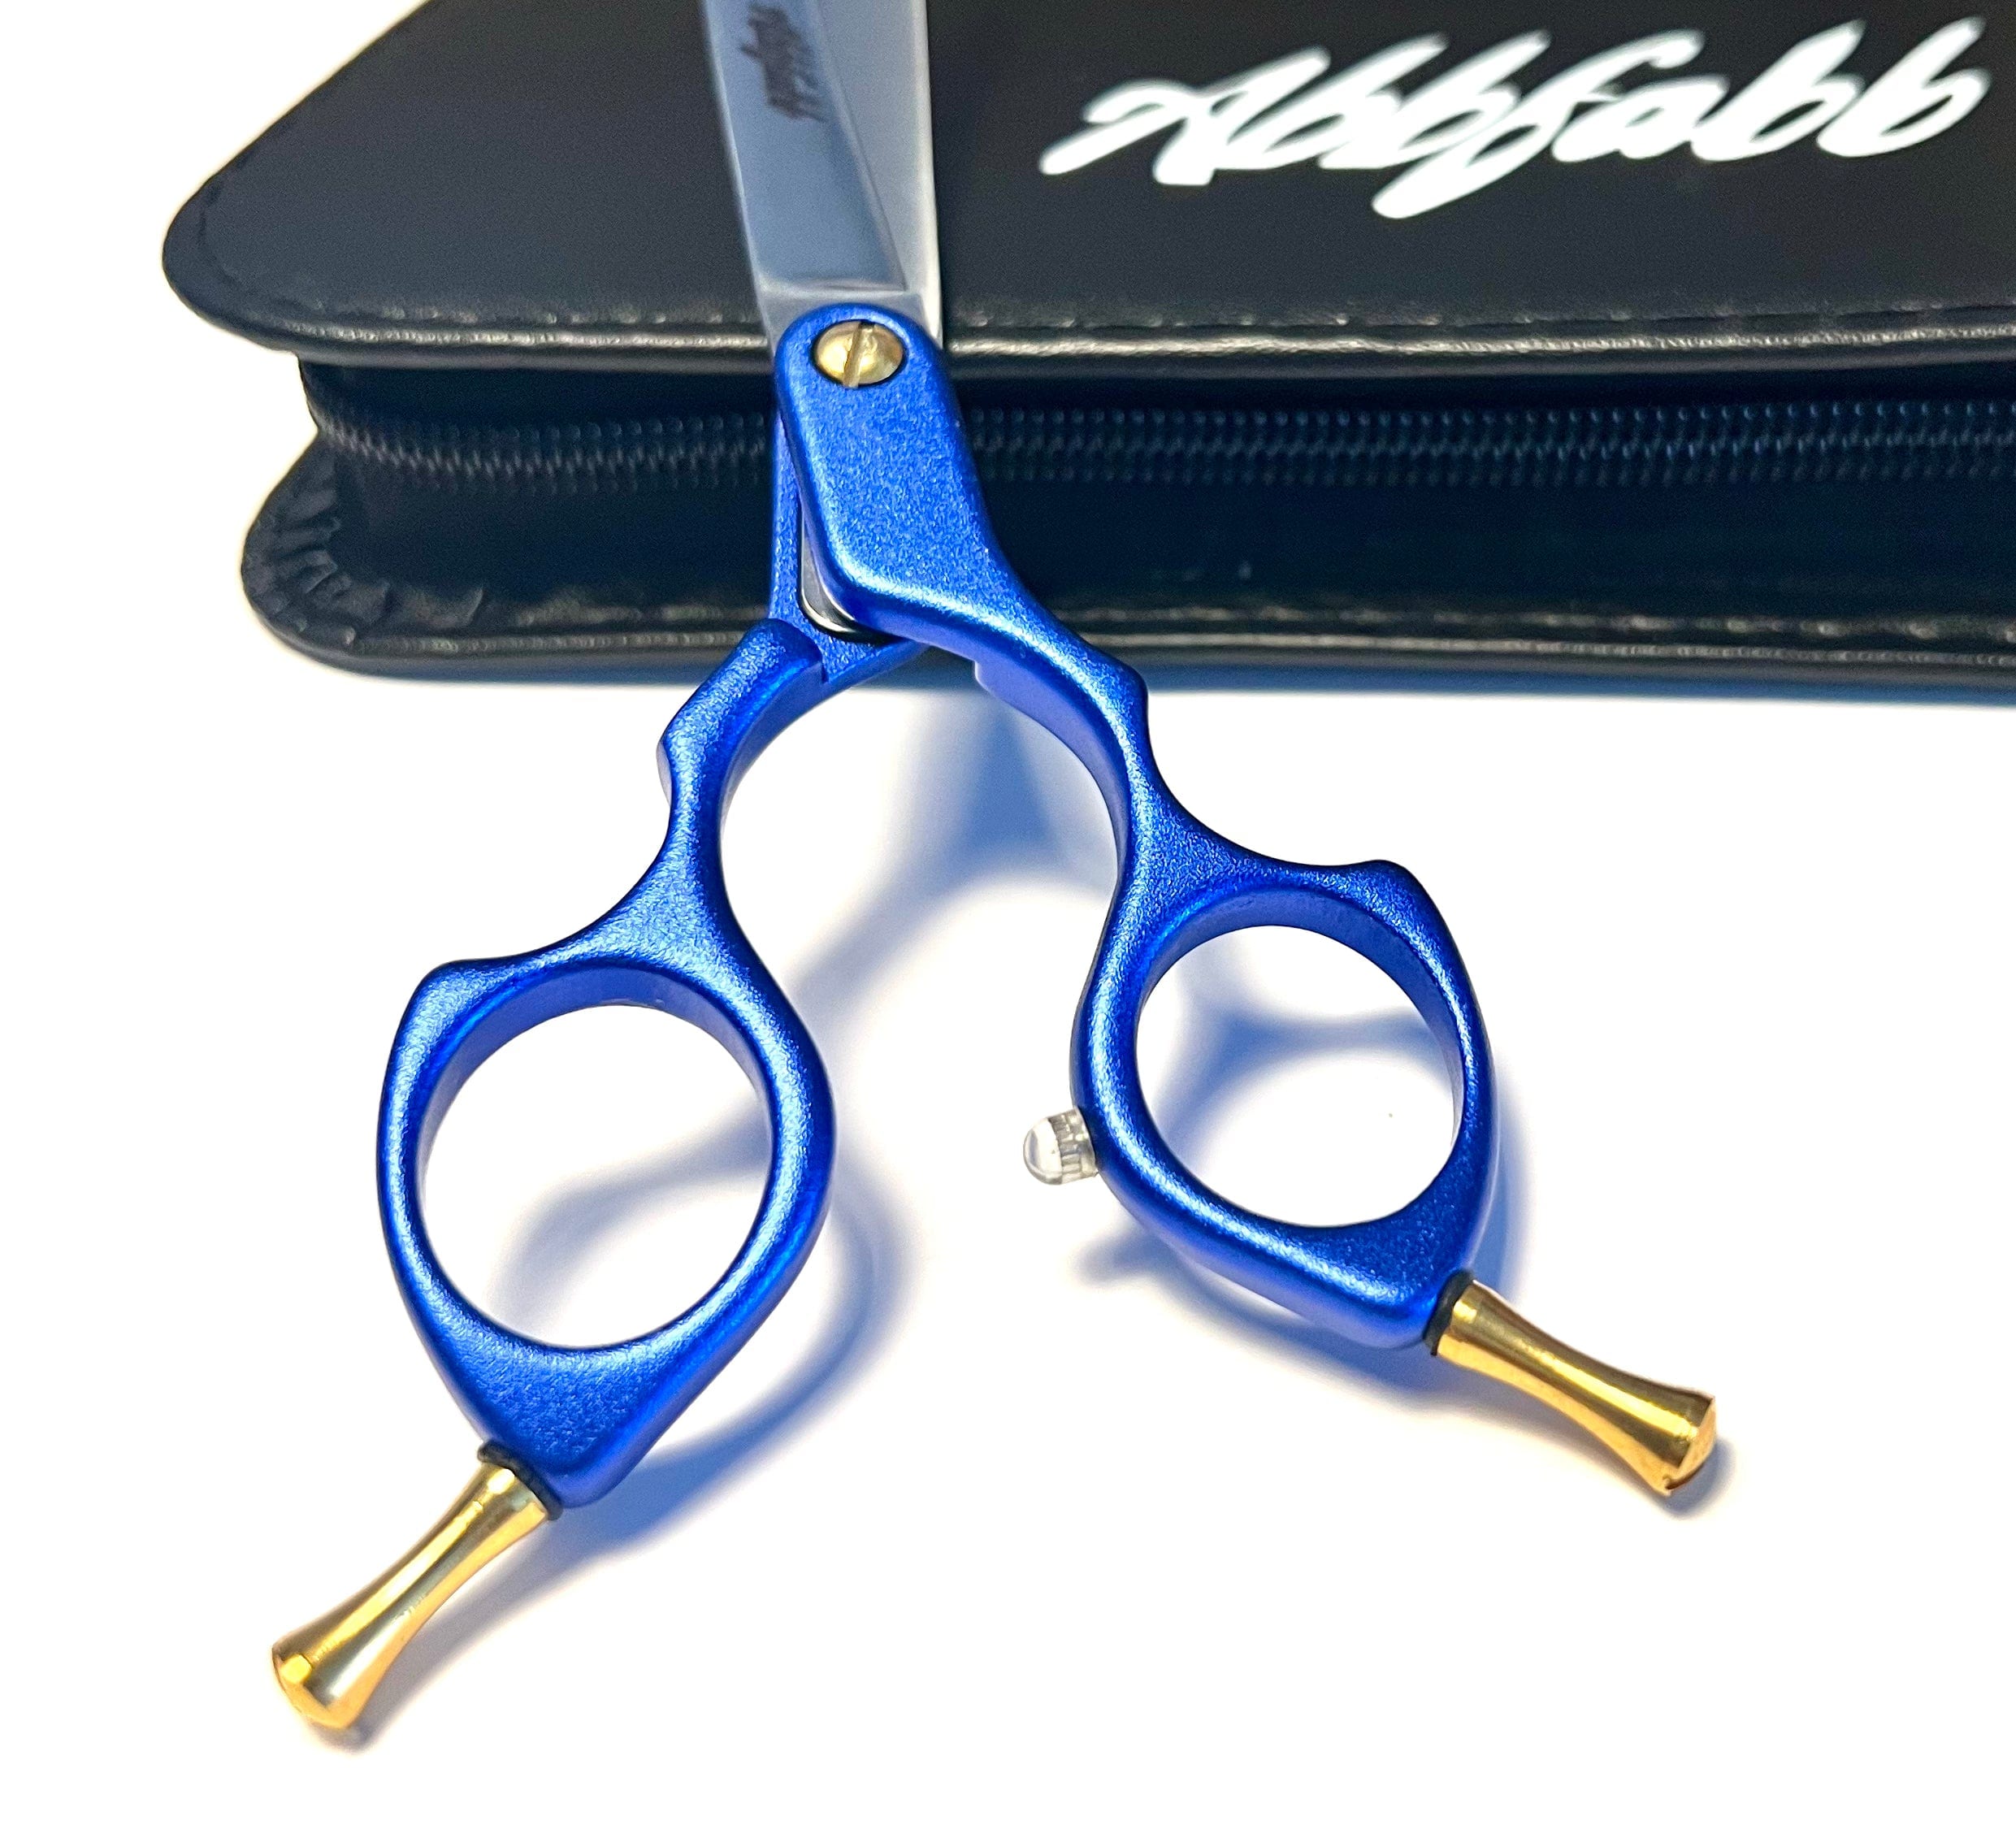 Abbfabb Grooming Scissors 6.5" Extreme Reversible Curved Dog Grooming Scissor. An Asian Fusion Dog Grooming Scissor. A Muzzle Maker